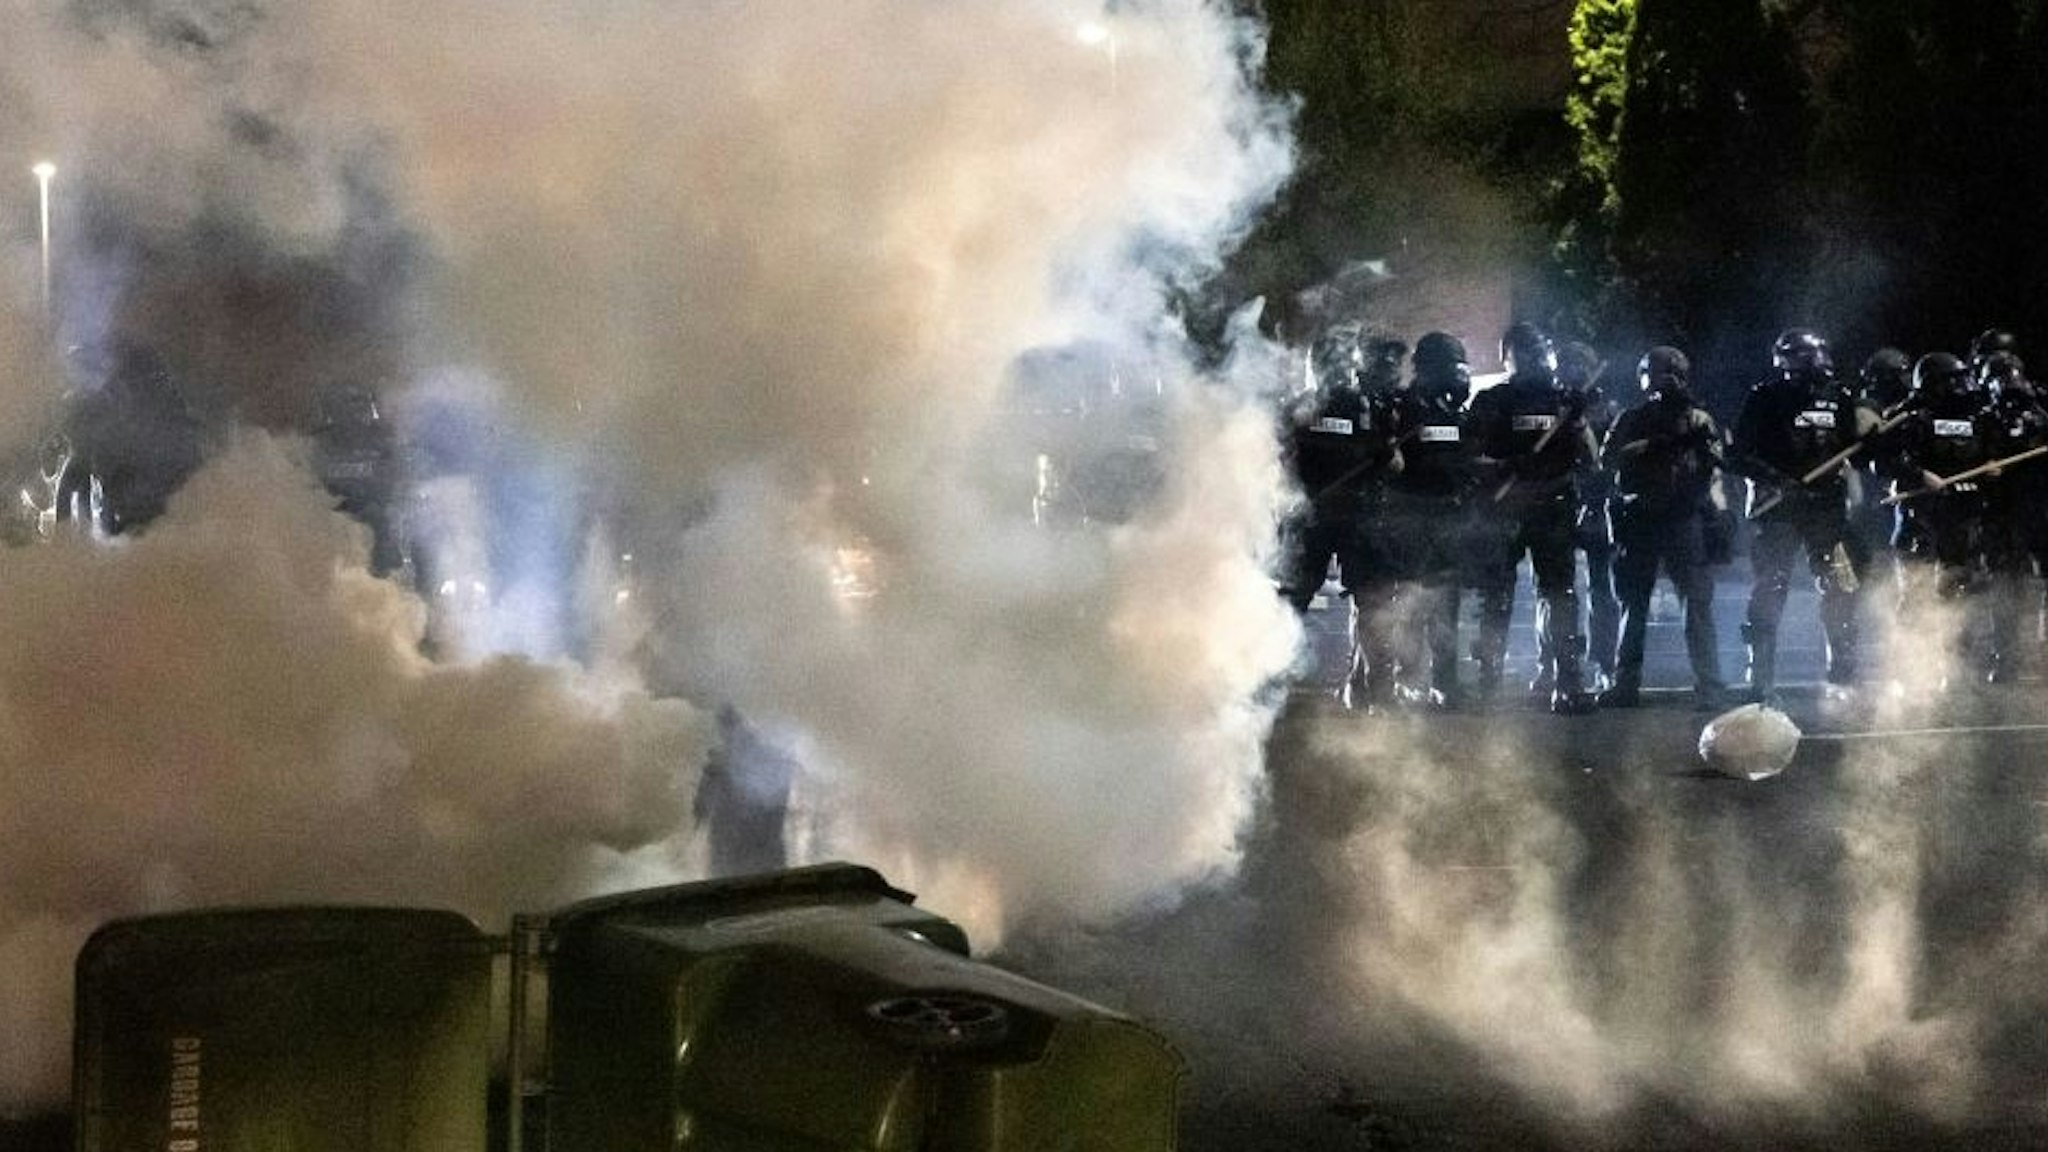 Police officers in riot gear fire tear gas in front of the Brooklyn Center Police Station as people gather to protest after a police officer shot and killed a black man in Brooklyn Center, Minneapolis, Minnesota on April 11, 2021. - Protests broke out April 11, 2021 night after US police fatally shot a young Black man in a suburb of Minneapolis -- where a former police officer is currently on trial for the murder of George Floyd. Hundreds of people gathered outside the police station in Brooklyn Center, northwest of Minneapolis. Police fired teargas and flash bangs at the demonstrators, according to an AFP videojournalist at the scene. (Photo by Kerem Yucel / AFP) (Photo by